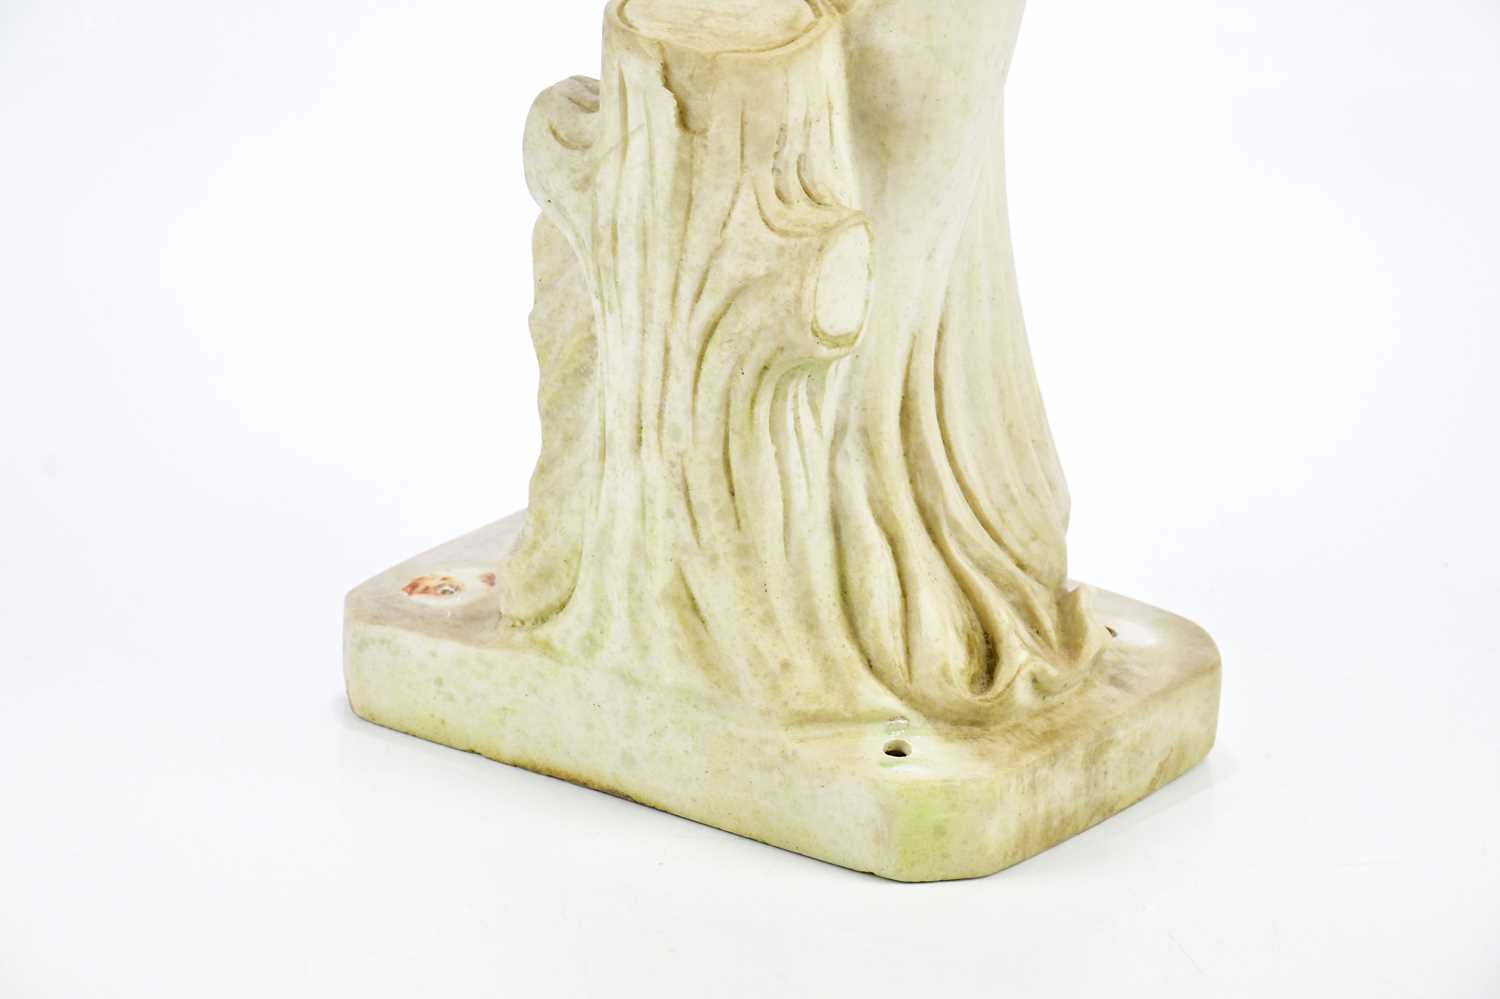 A modern resin figure of a maiden wearing a flowing dress, height 82cm. - Image 8 of 8